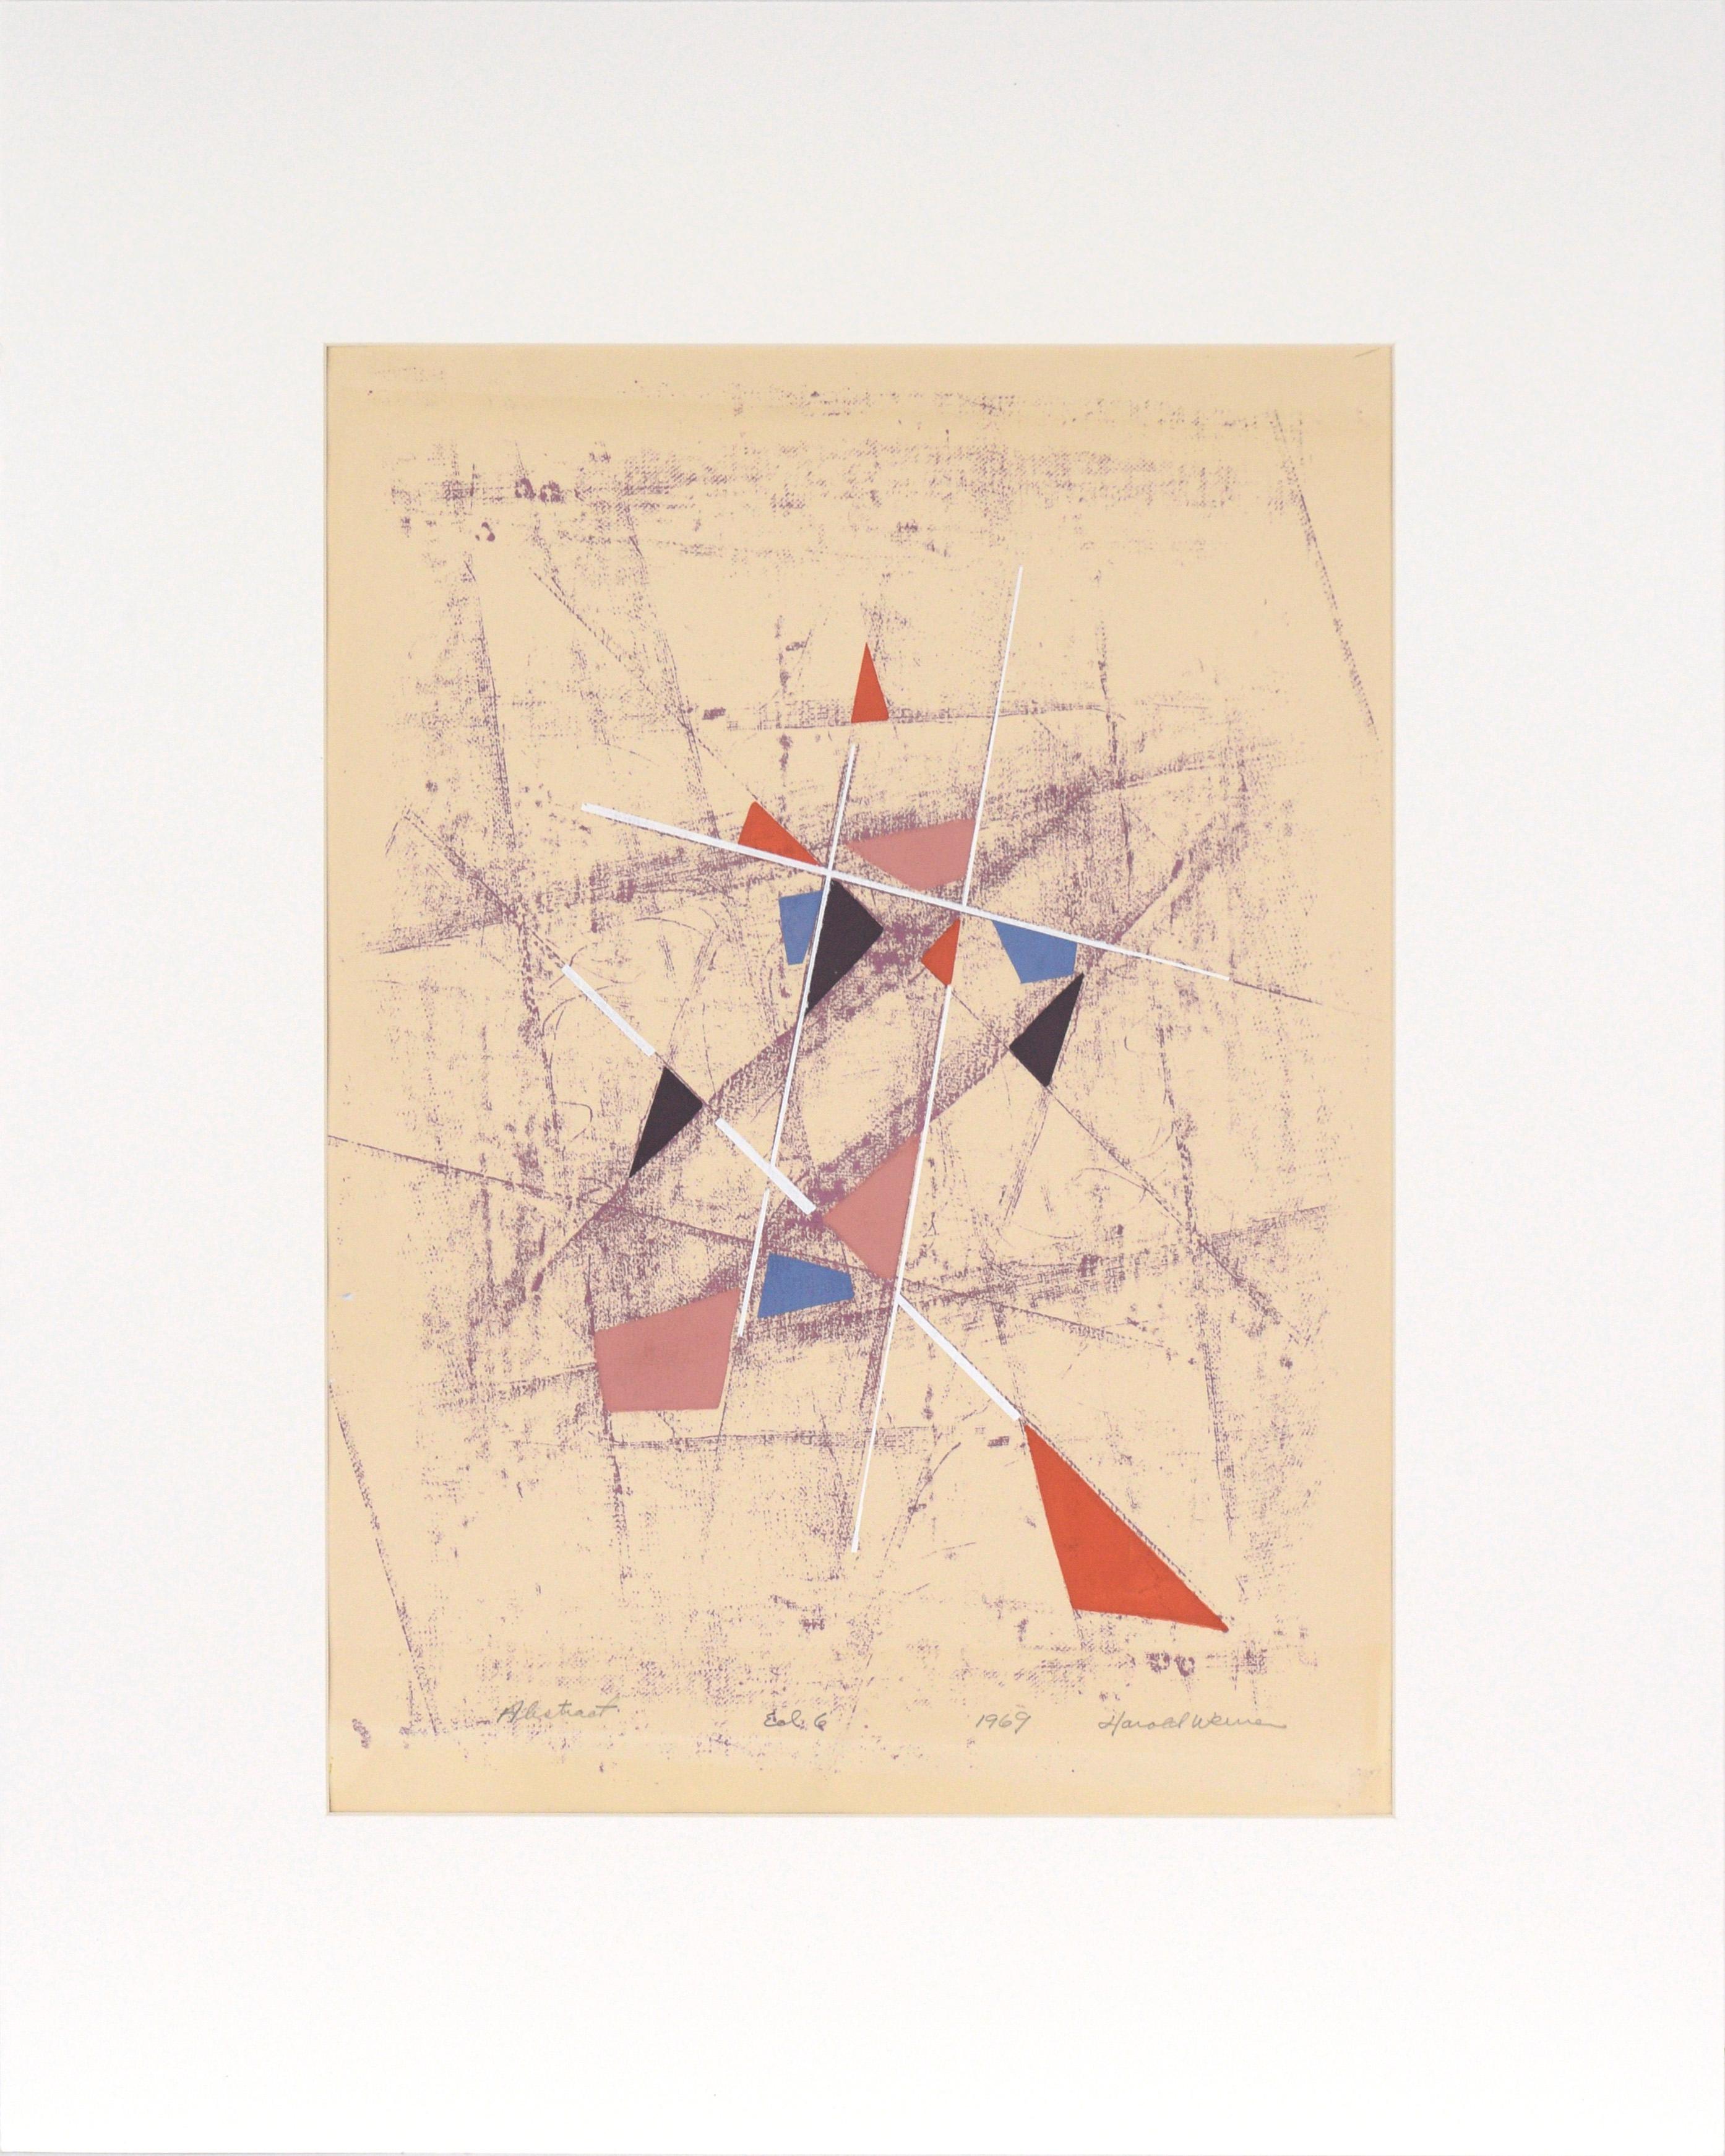 Geometric Abstract Lithograph in the Style of Kandinsky by Harold Weiner
Playful abstract composition titled "Abstract" by Harold Weiner (20th Century). A small edition of 6 impressions. Several shapes are arranged in a balanced, pleasing manner.